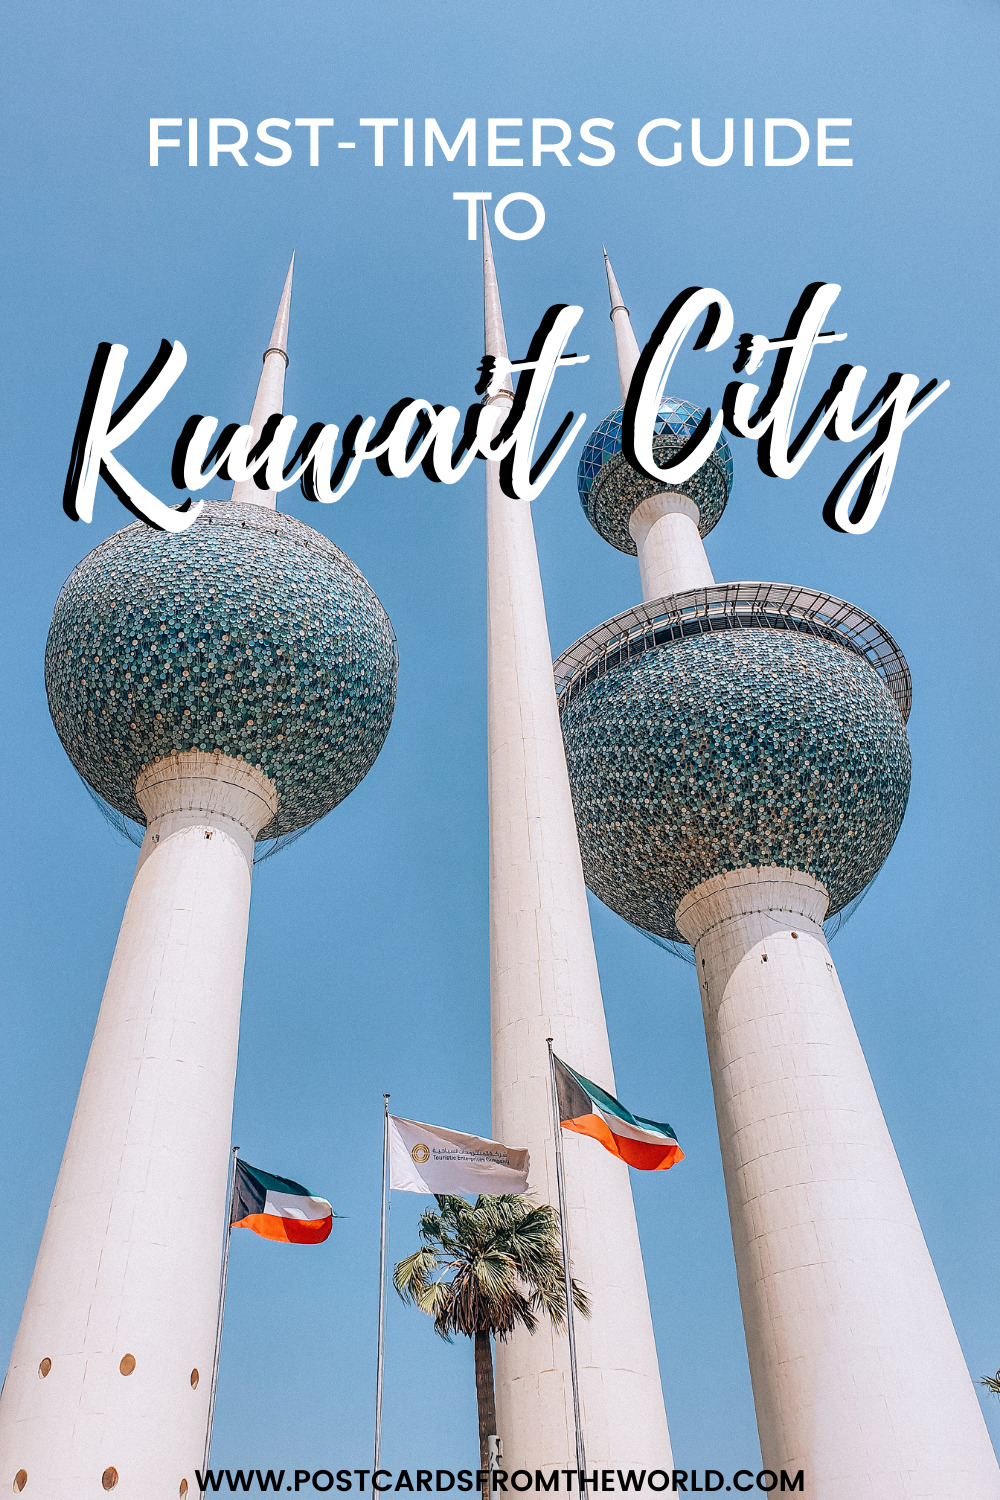 what to see and do in kuwait city